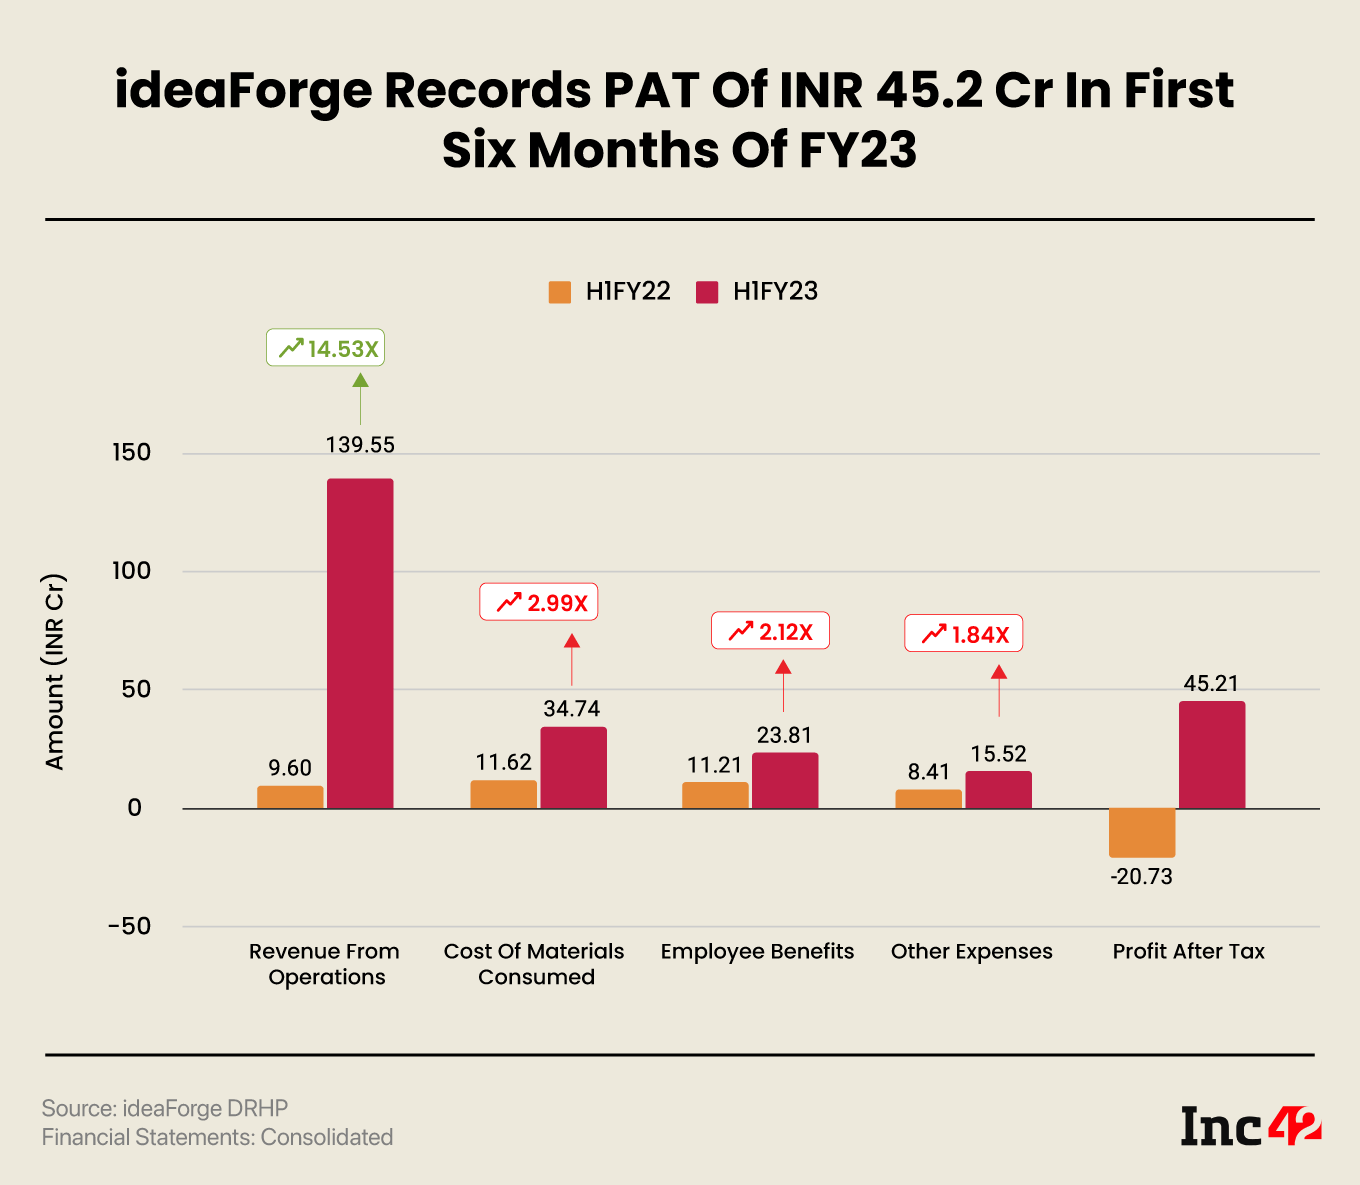 ideaforge Performance in H1 FY23